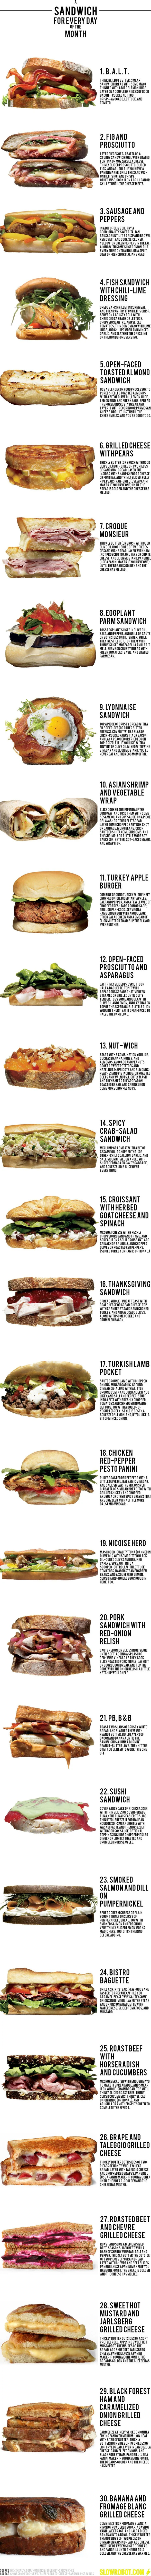 A Sandwich for Every Day of the Month